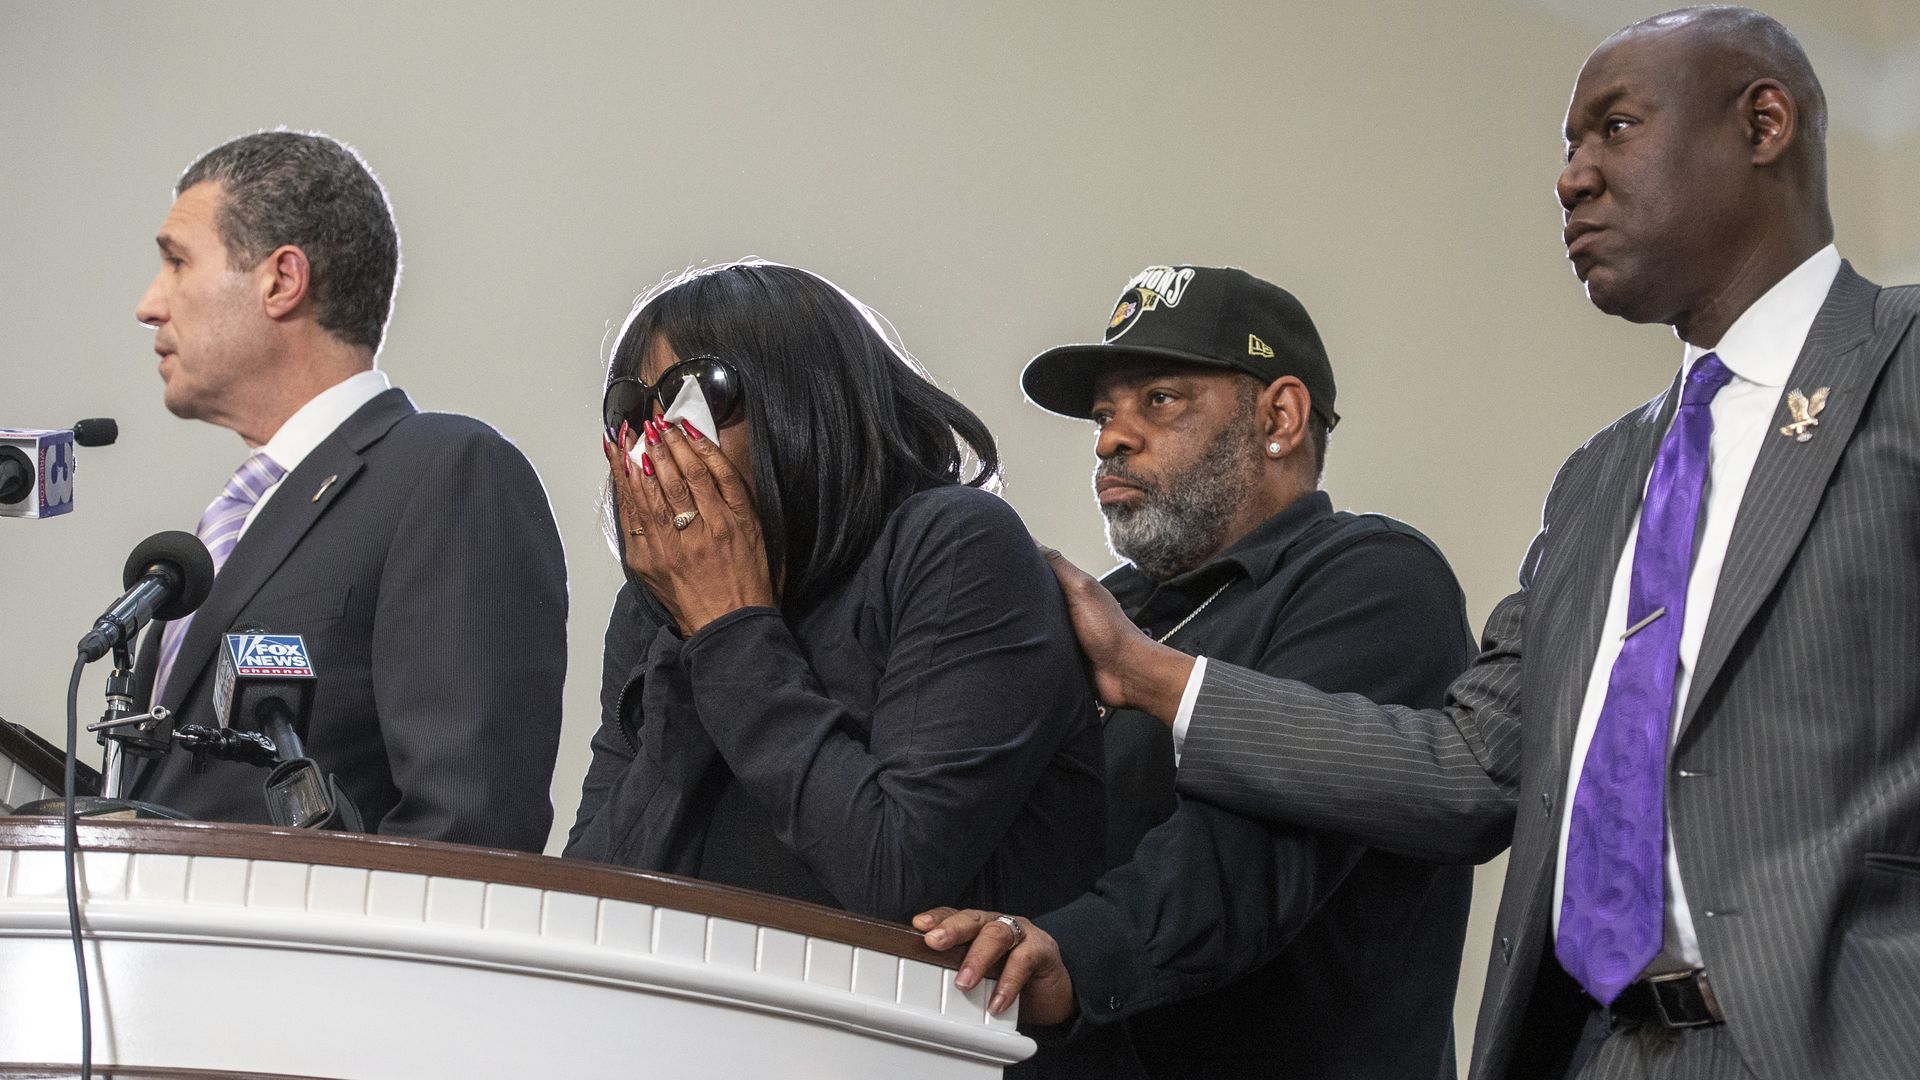 Tyre Nichols' mother, RowVaugn Wells, and stepfather, Rodney Wells, flanked by attorneys Ben Crump (right) and Antonio Romanucci (left) in a Memphis church on Jan. 23.